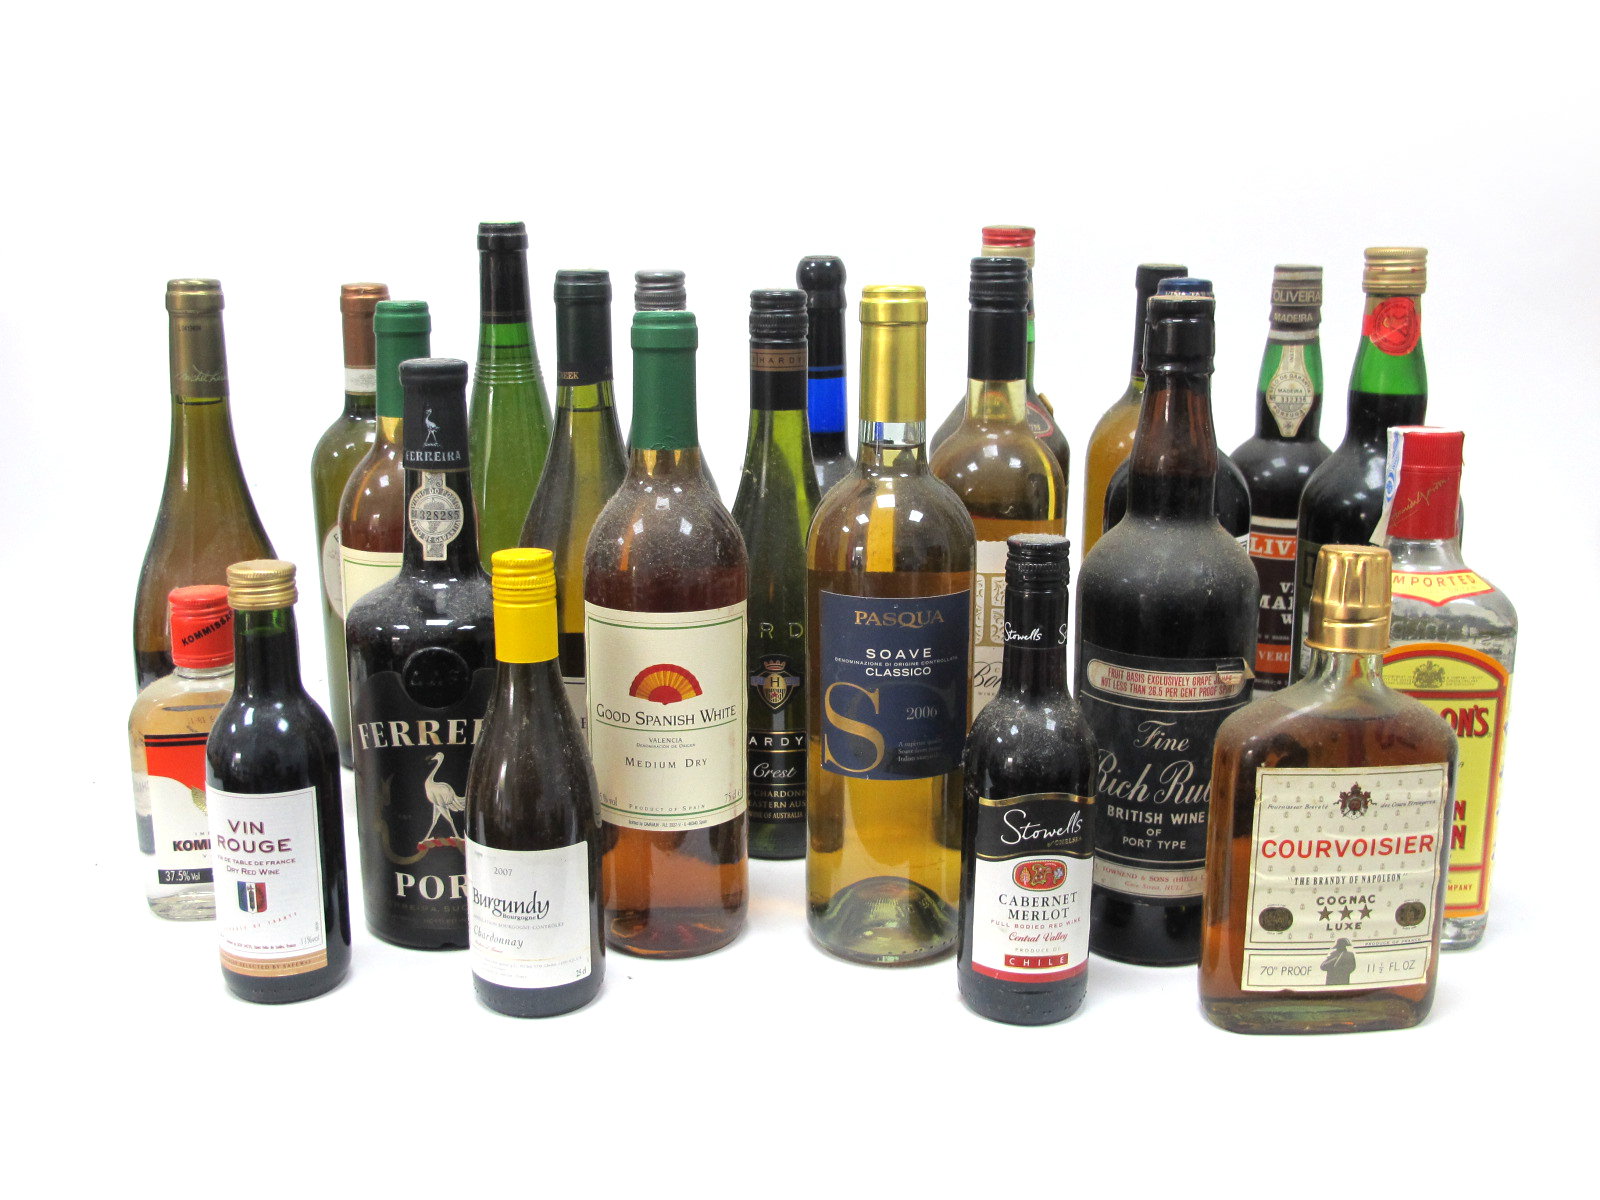 Mixed - A Mixed Assortment of Wines & Spirits including, port, couvoisier, gin, etc.